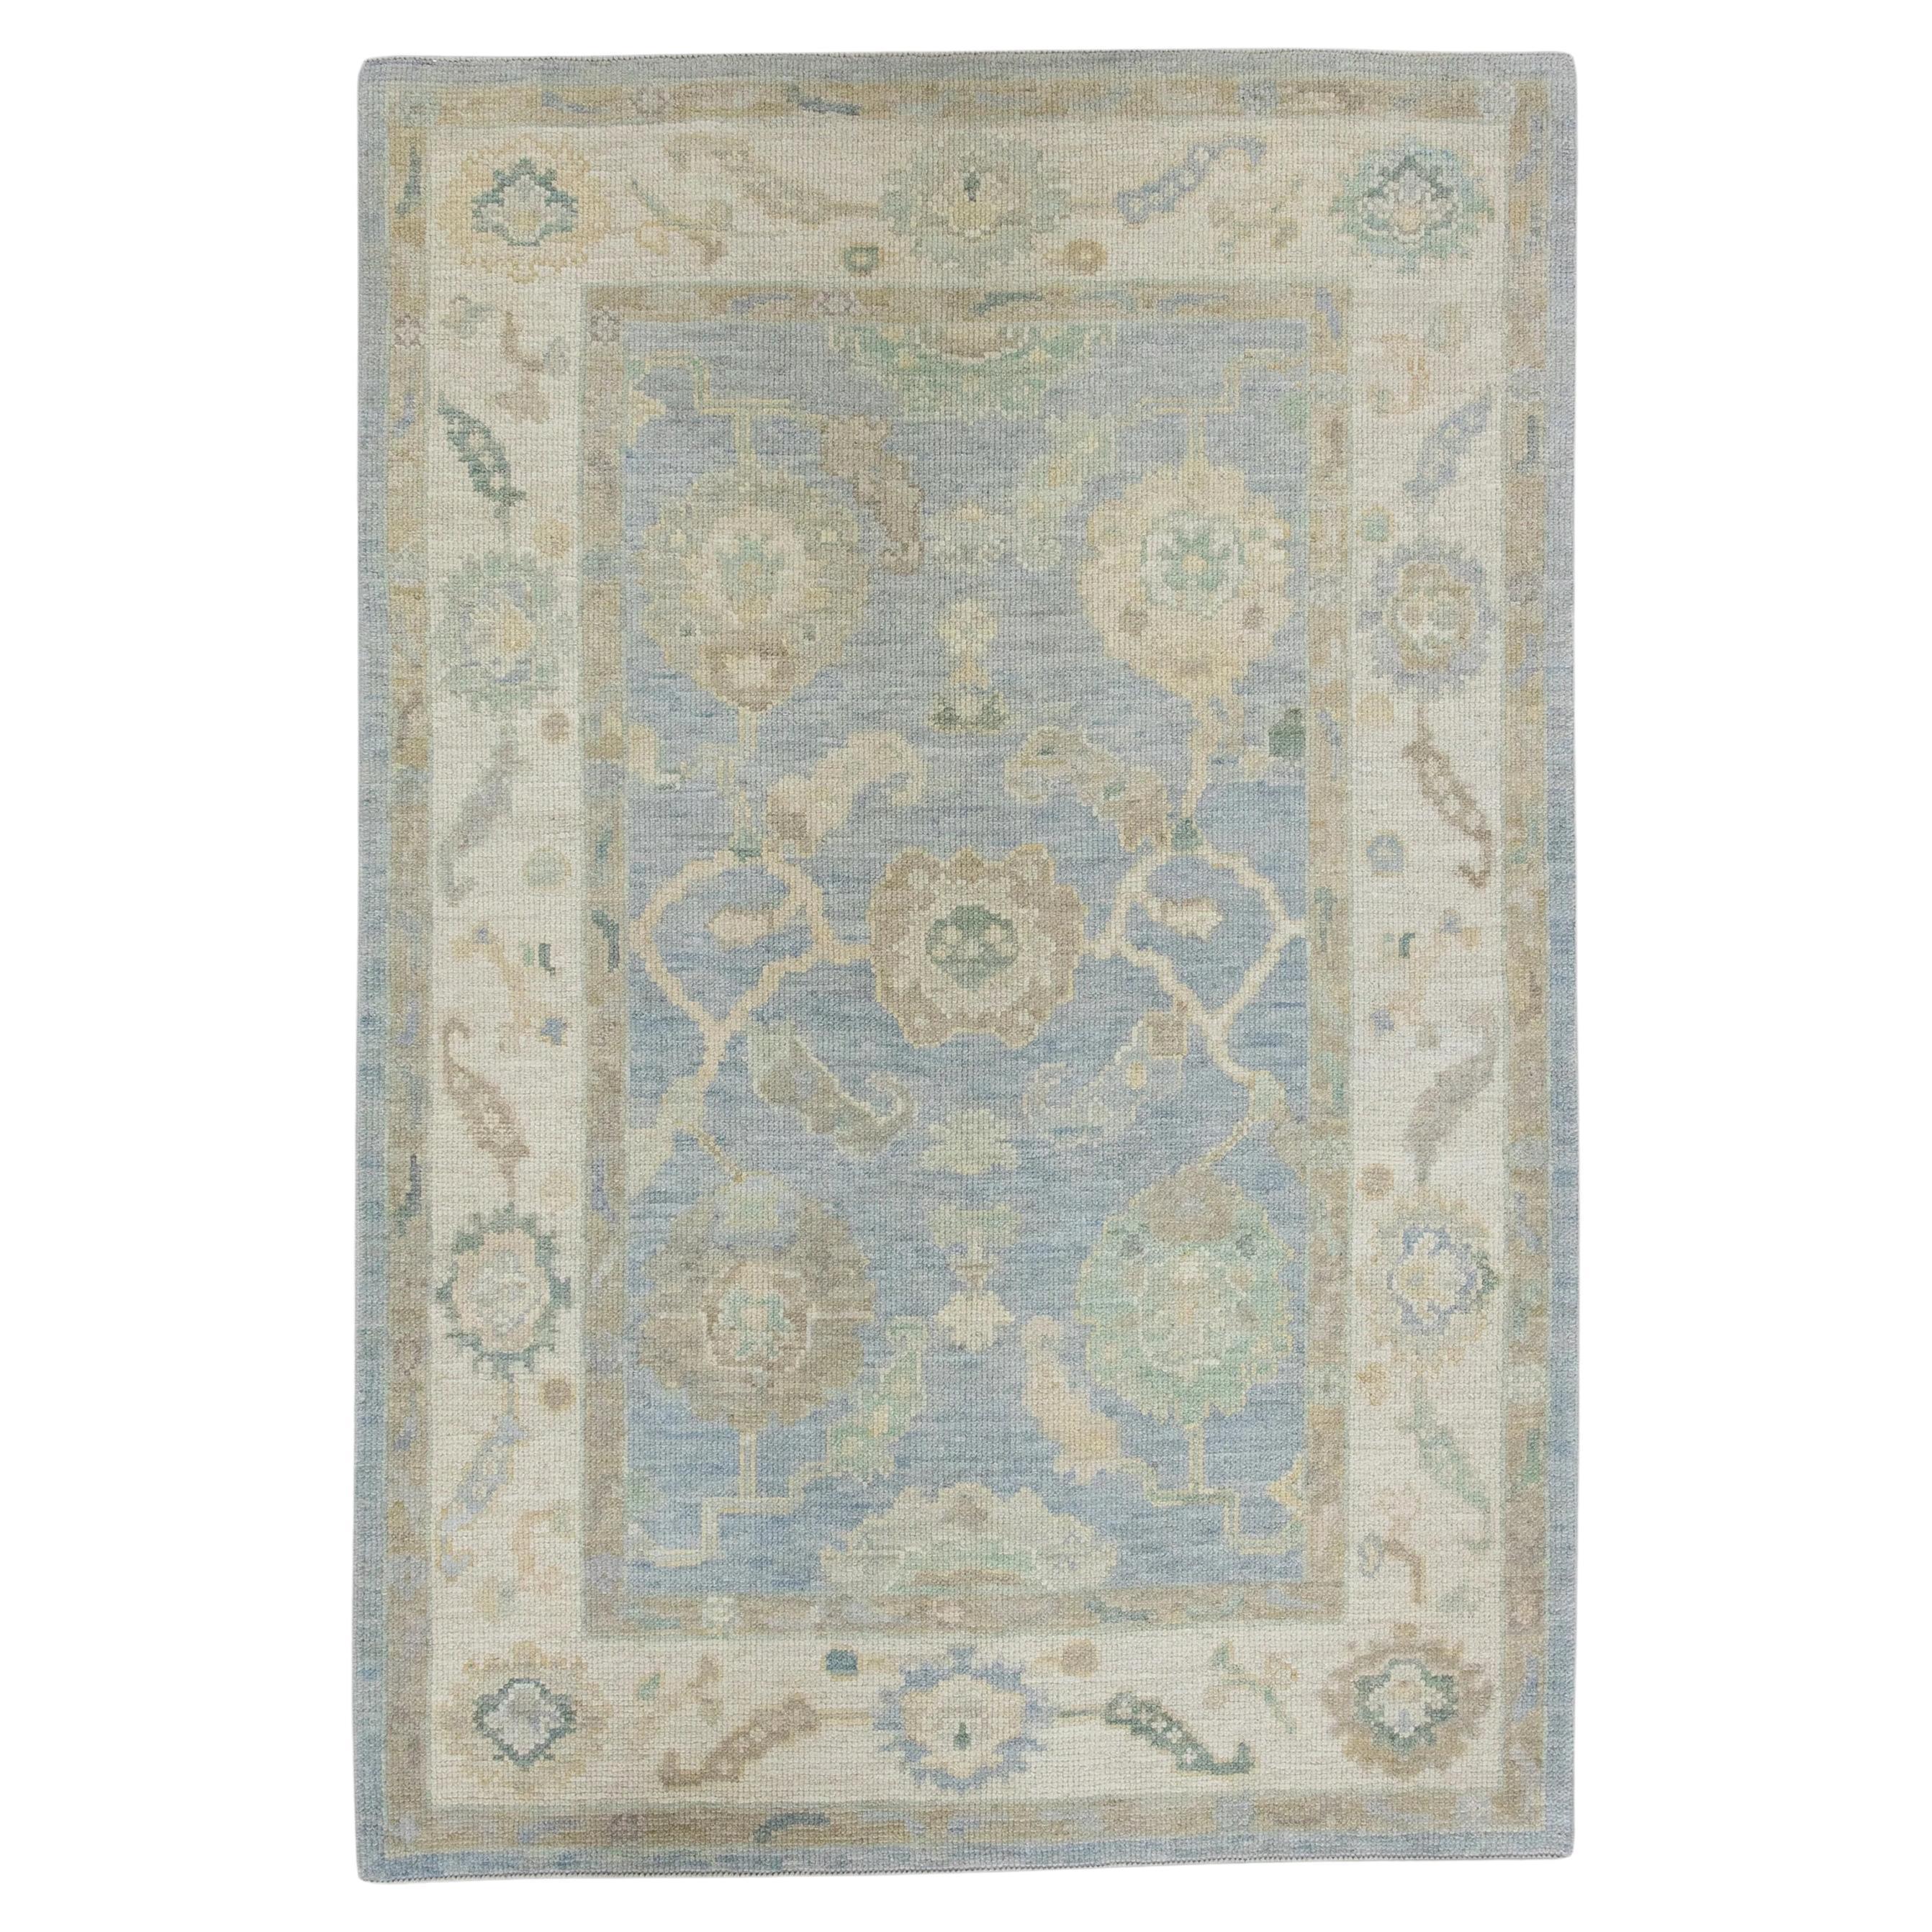 Blue Handwoven Wool Turkish Oushak Rug in Multicolor Floral Pattern 4'1" x 6'